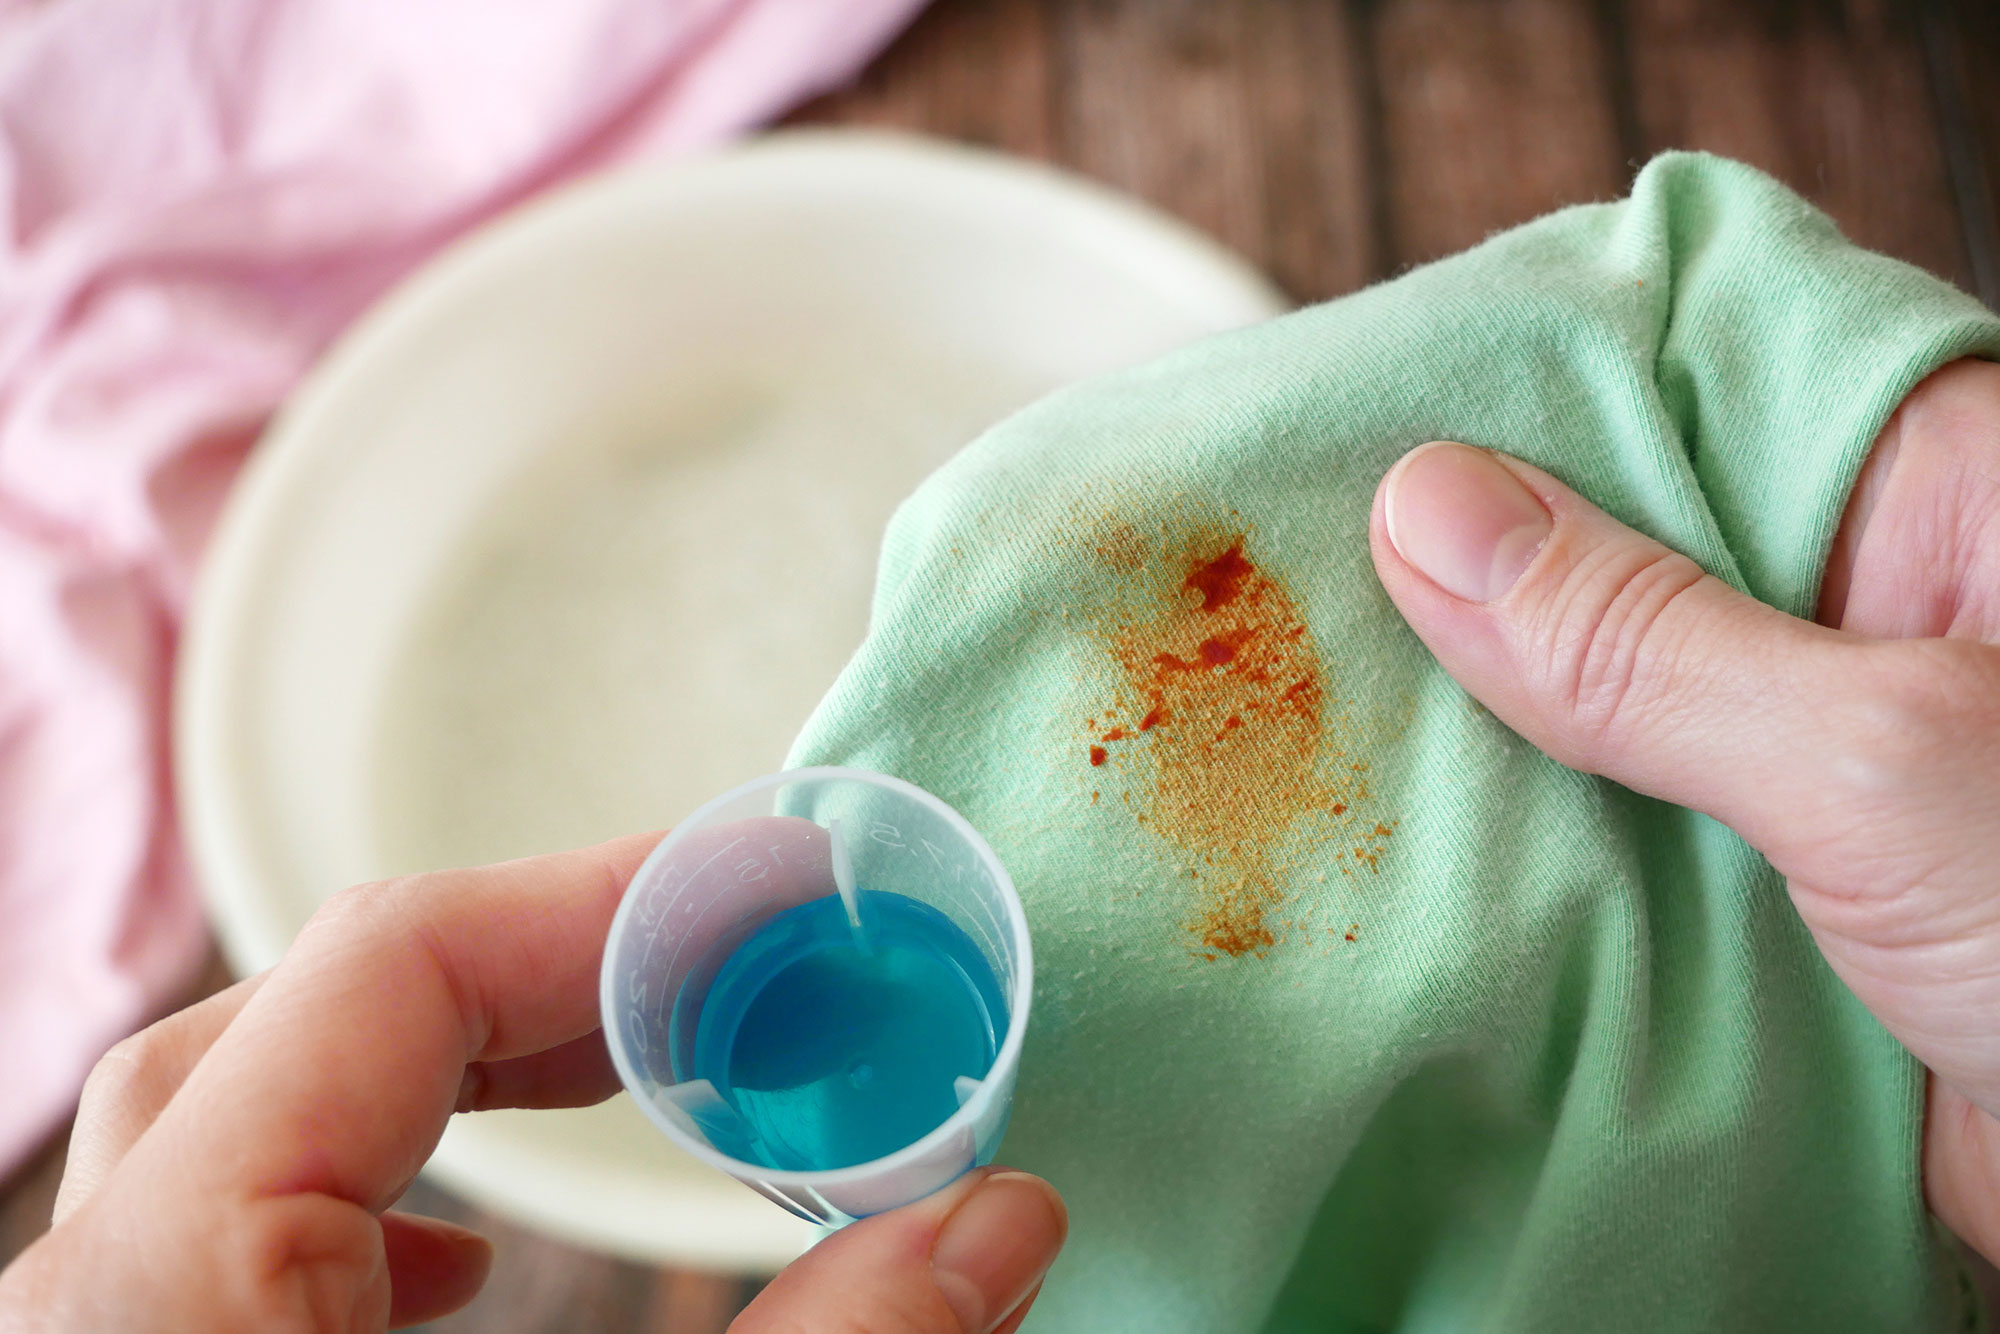 Handy Tips for Stubborn Stains